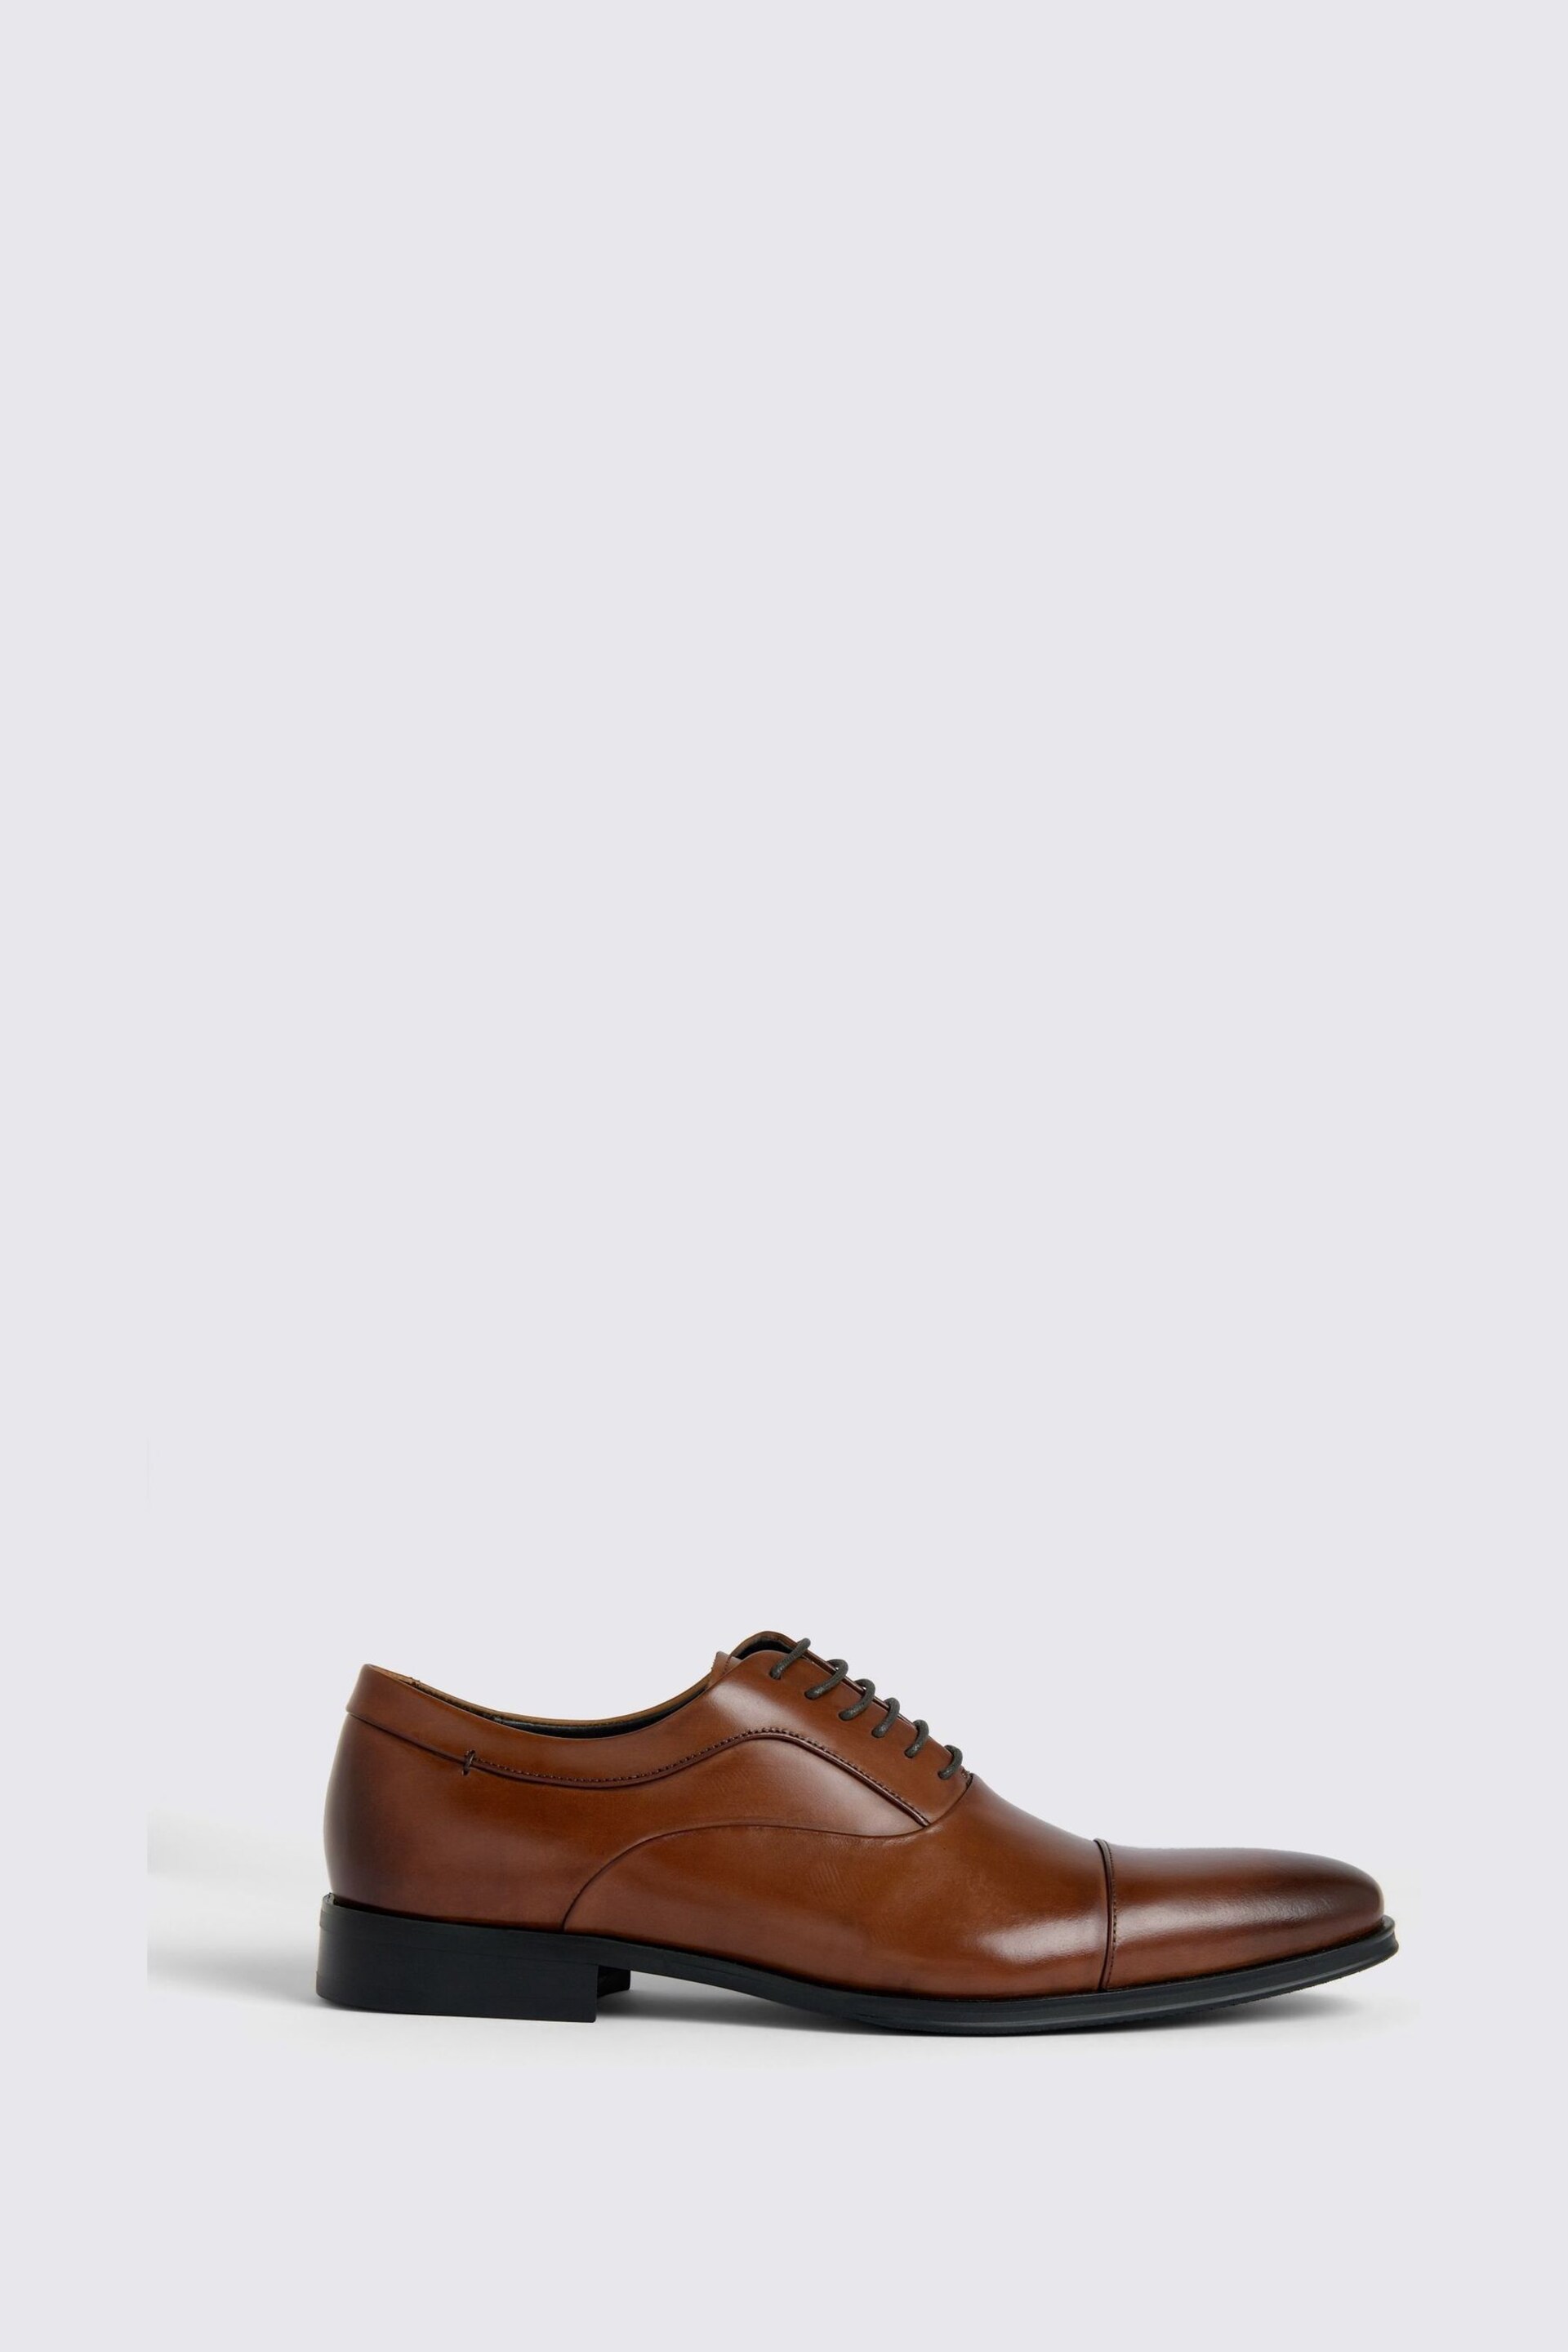 MOSS Tan John Guildhall Oxford Shoes - Image 2 of 5